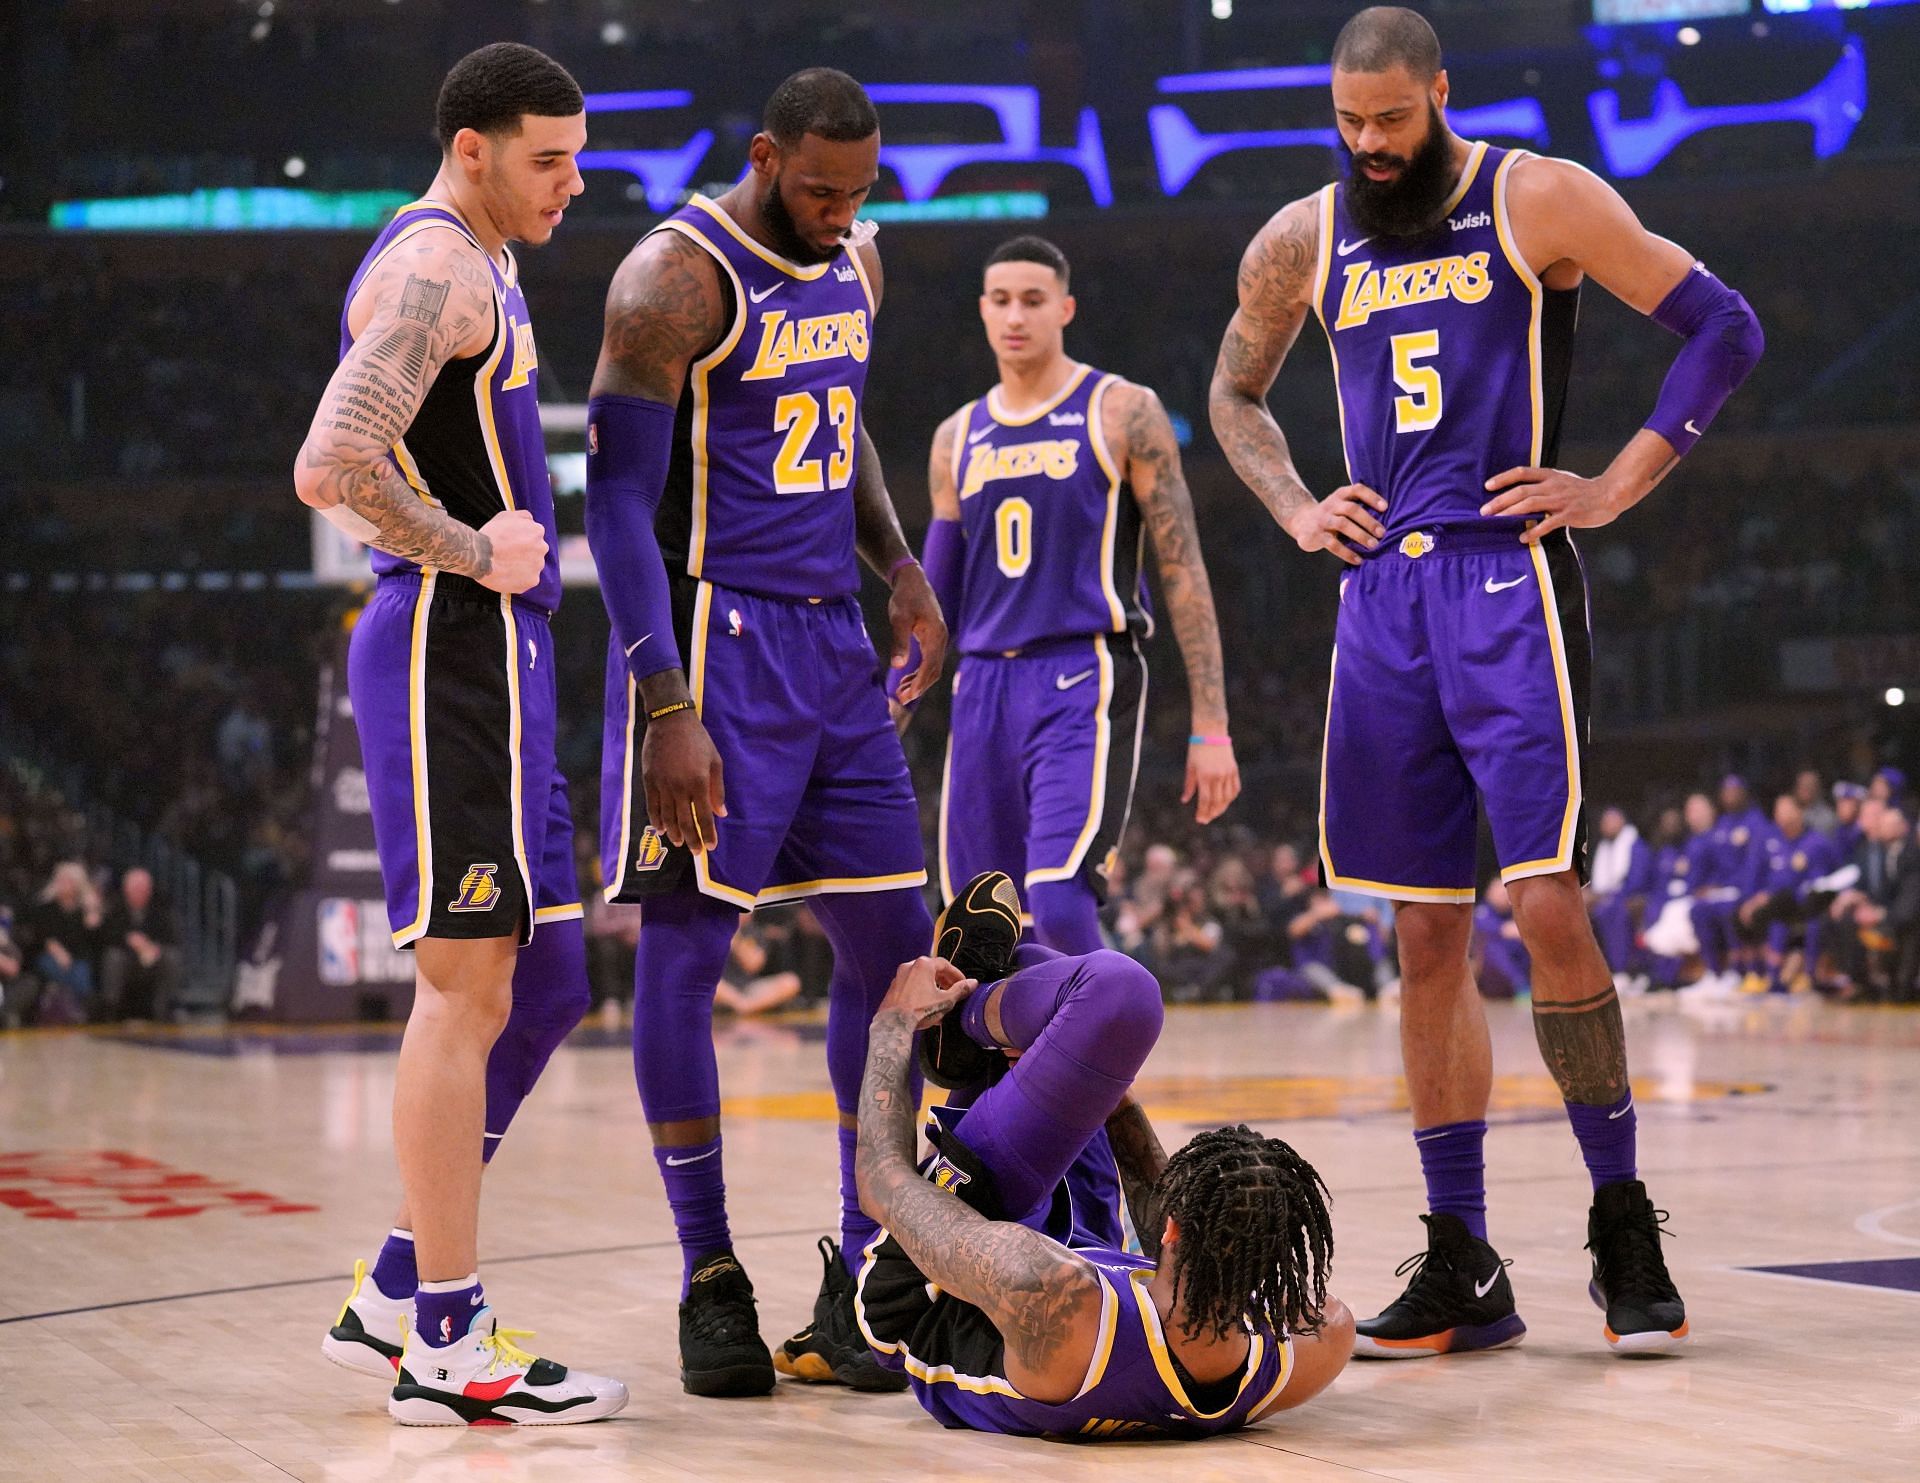 The LA Lakers team in 2018